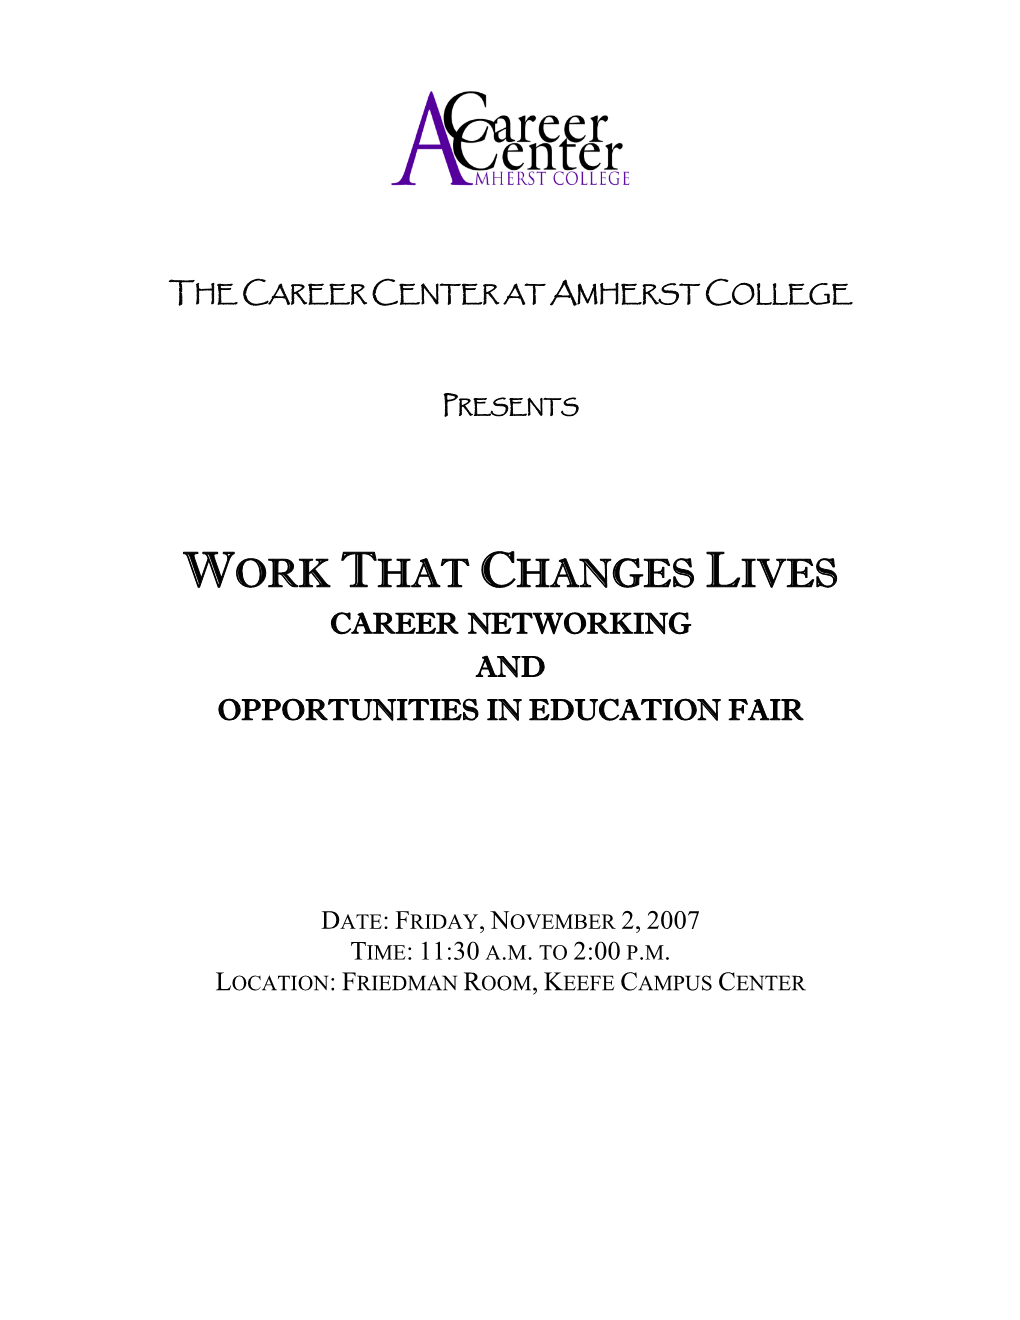 Work That Changes Lives Career Networking and Opportunities in Education Fair